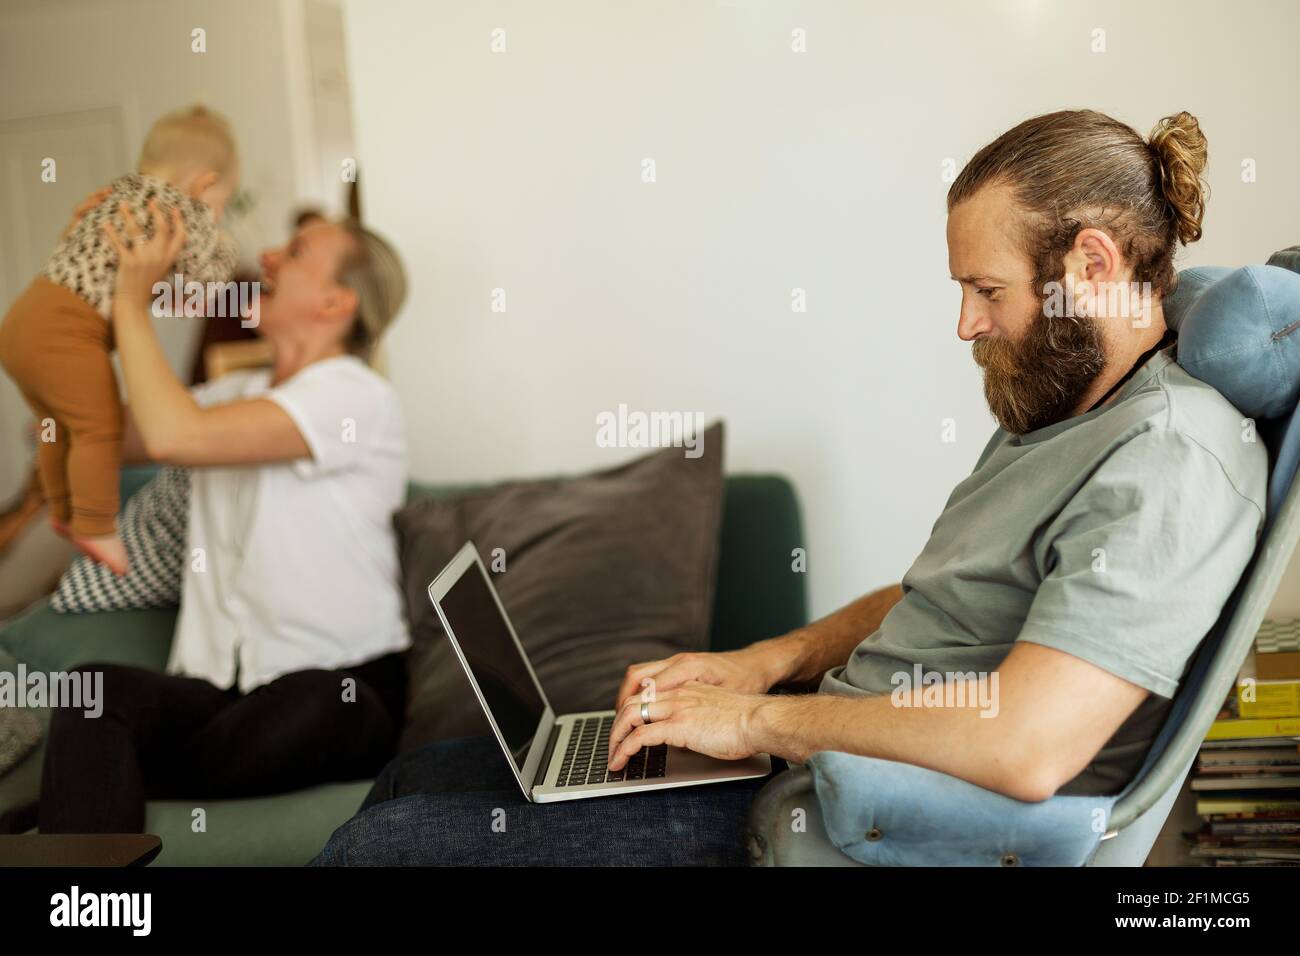 Man sitting on chair and using laptop Stock Photo